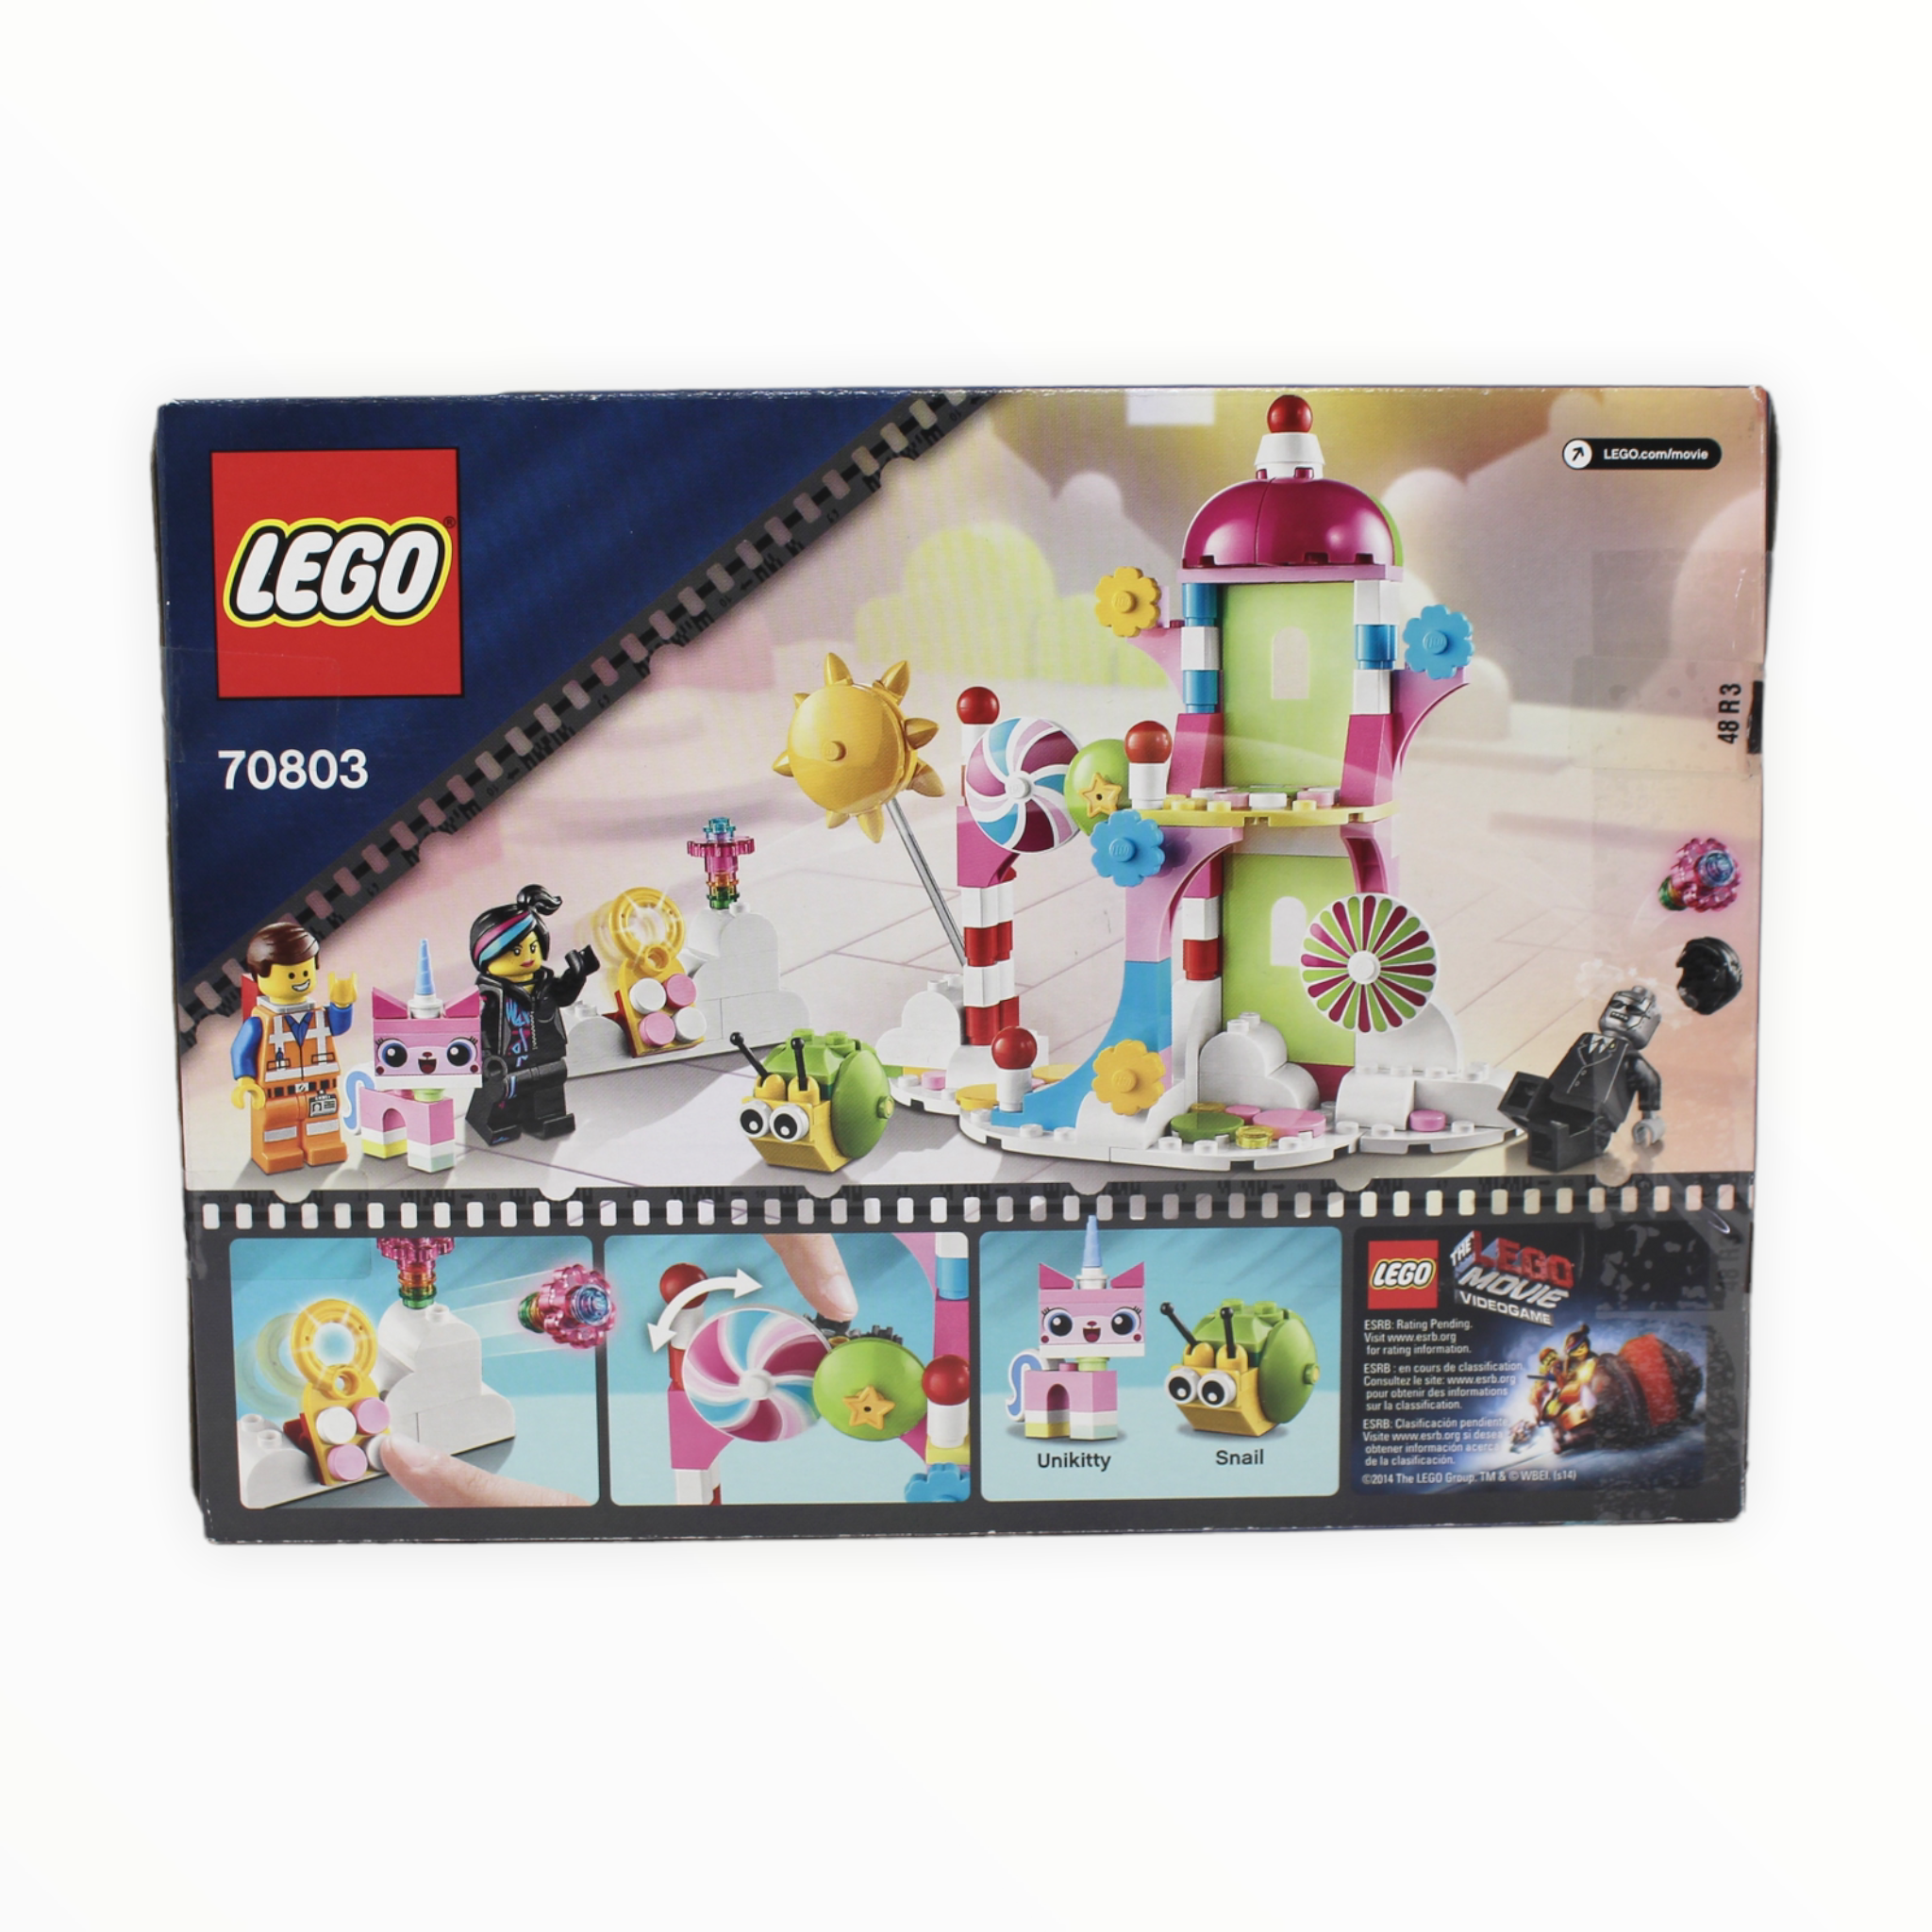 Certified Used Set 70803 The LEGO Movie Cloud Cuckoo Palace